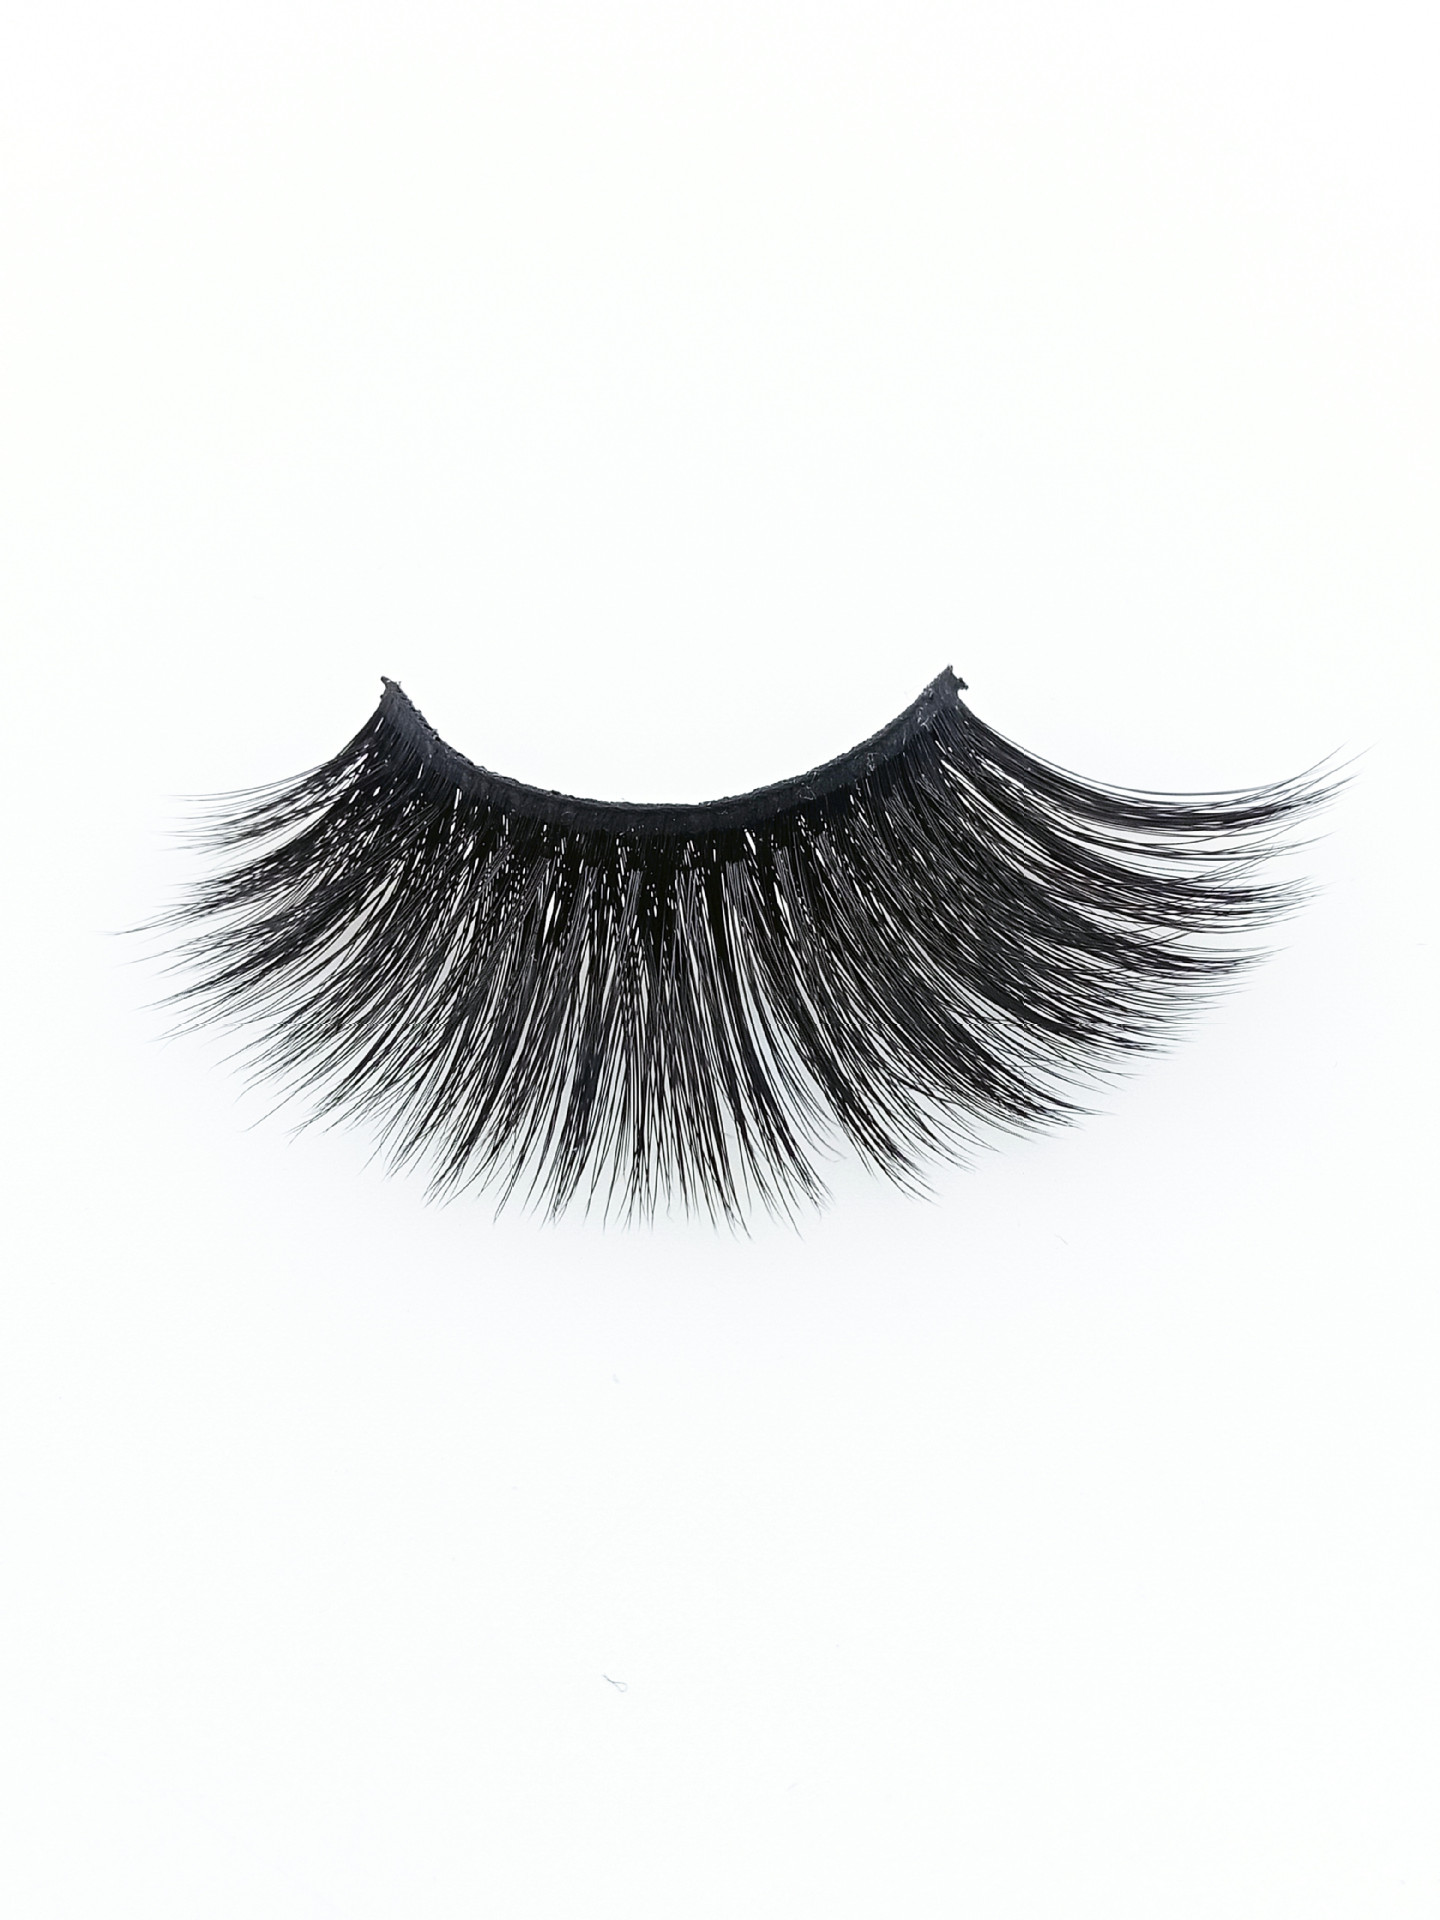 25mm False Eyelashes One-Pair Package Three-Dimensional Cross Thick Curl Multi-Layer Exaggerated Handmade Factory Wholesale